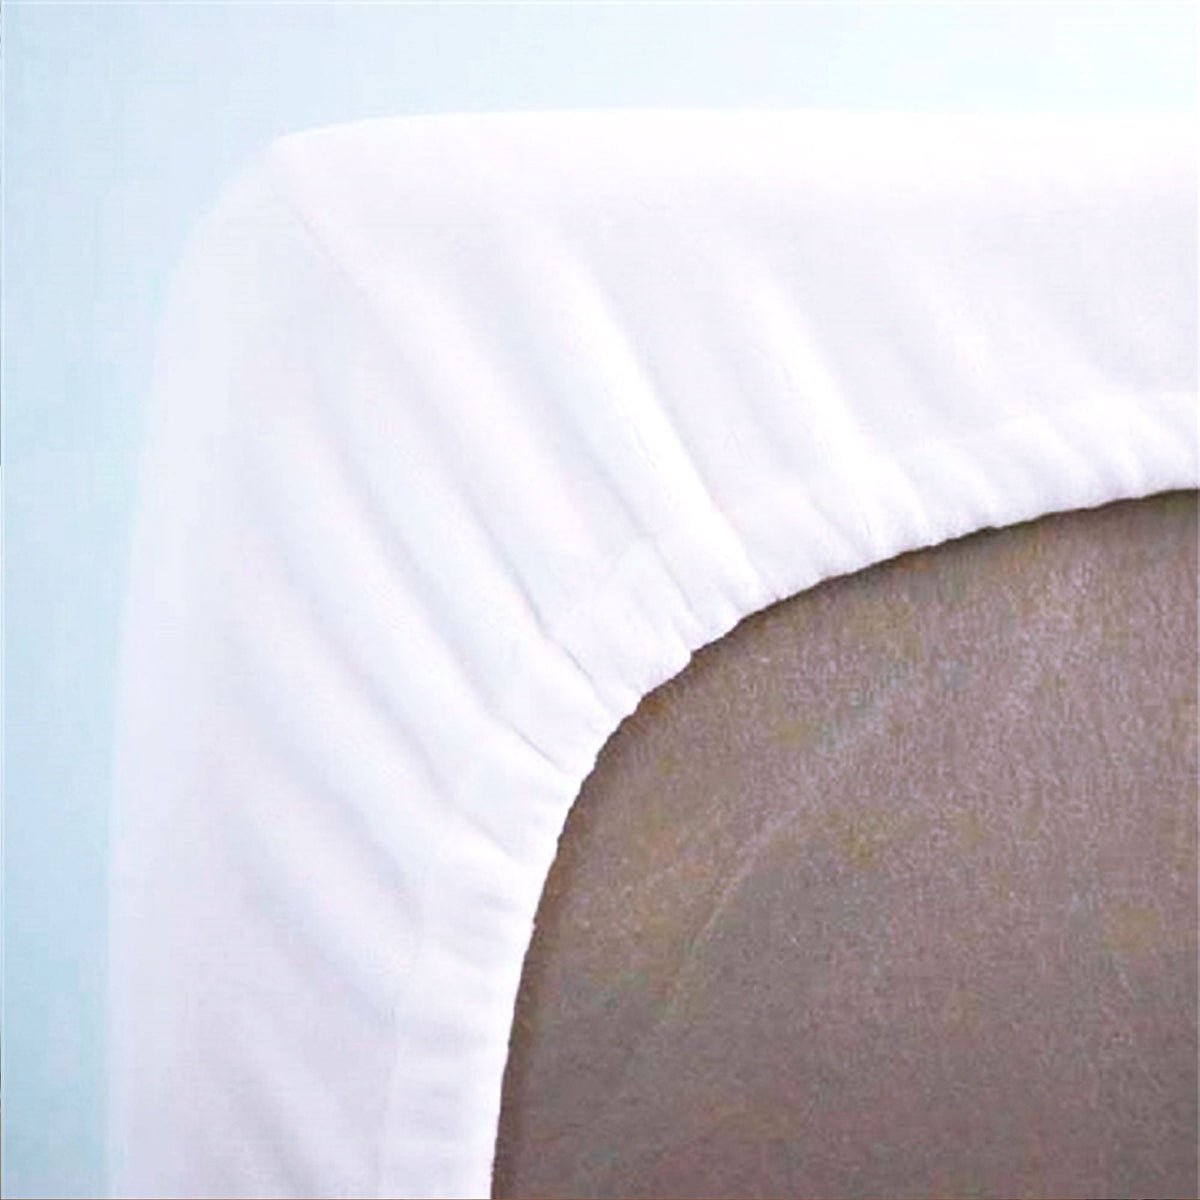  white fitted sheet details - Fleece Fitted Sheet - Luster Loft - American Blanket Company